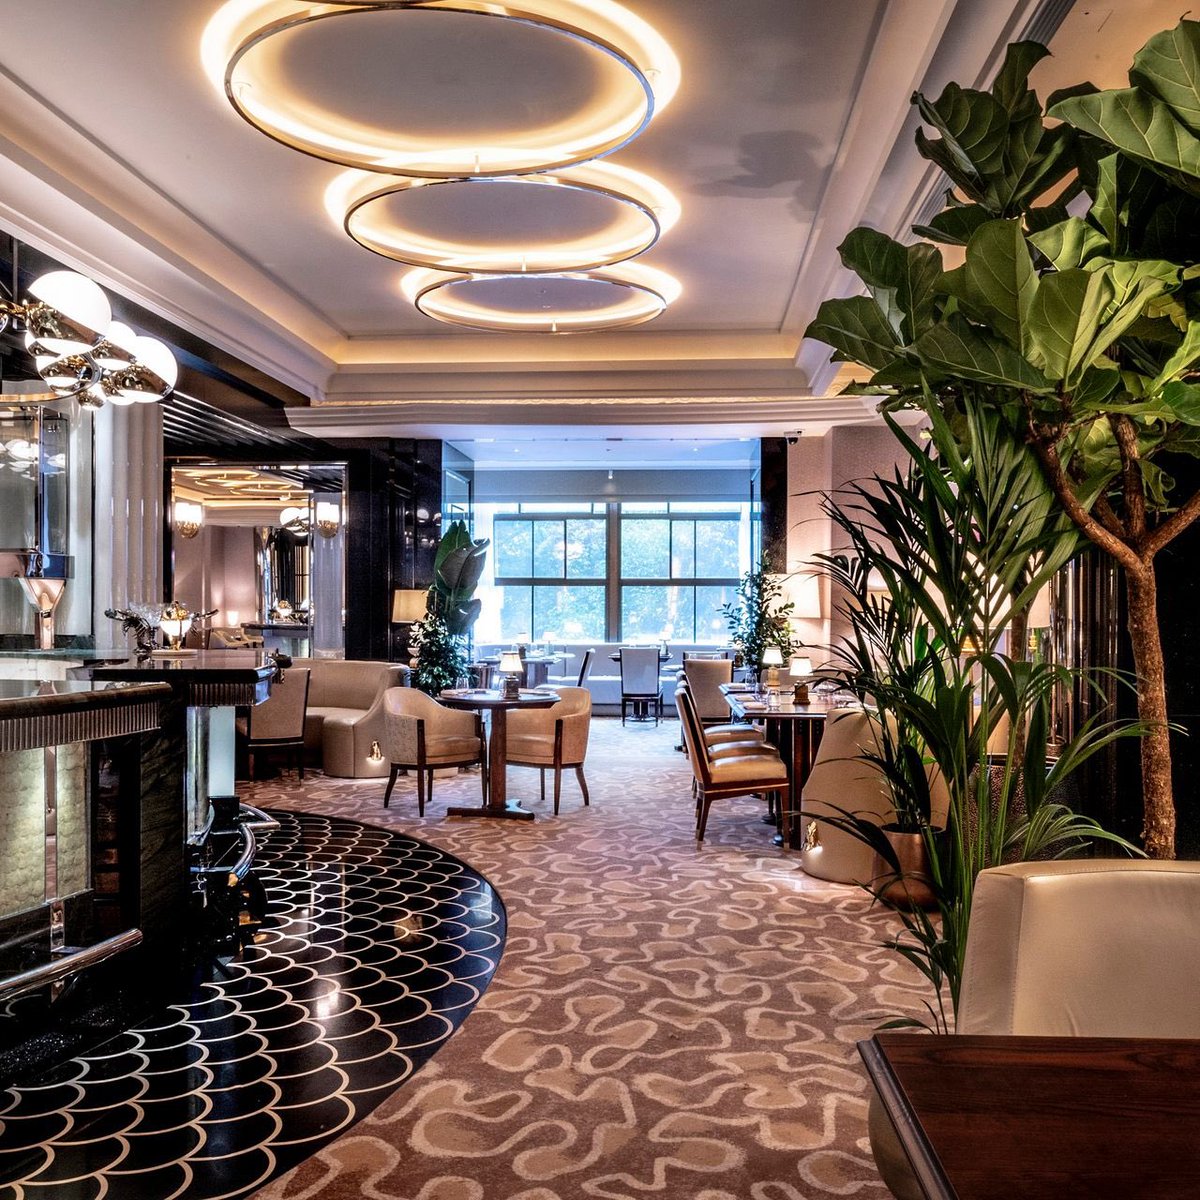 Your guests will LOVE our Private Dining at the River Restaurant by Gordon Ramsay, available to have in your silent auction!

A beautifully classic, yet stylish restaurant in the heart of The Savoy, London.

Want to know more about our auction lots? Send us a message. https://t.co/pqOsVNayTI